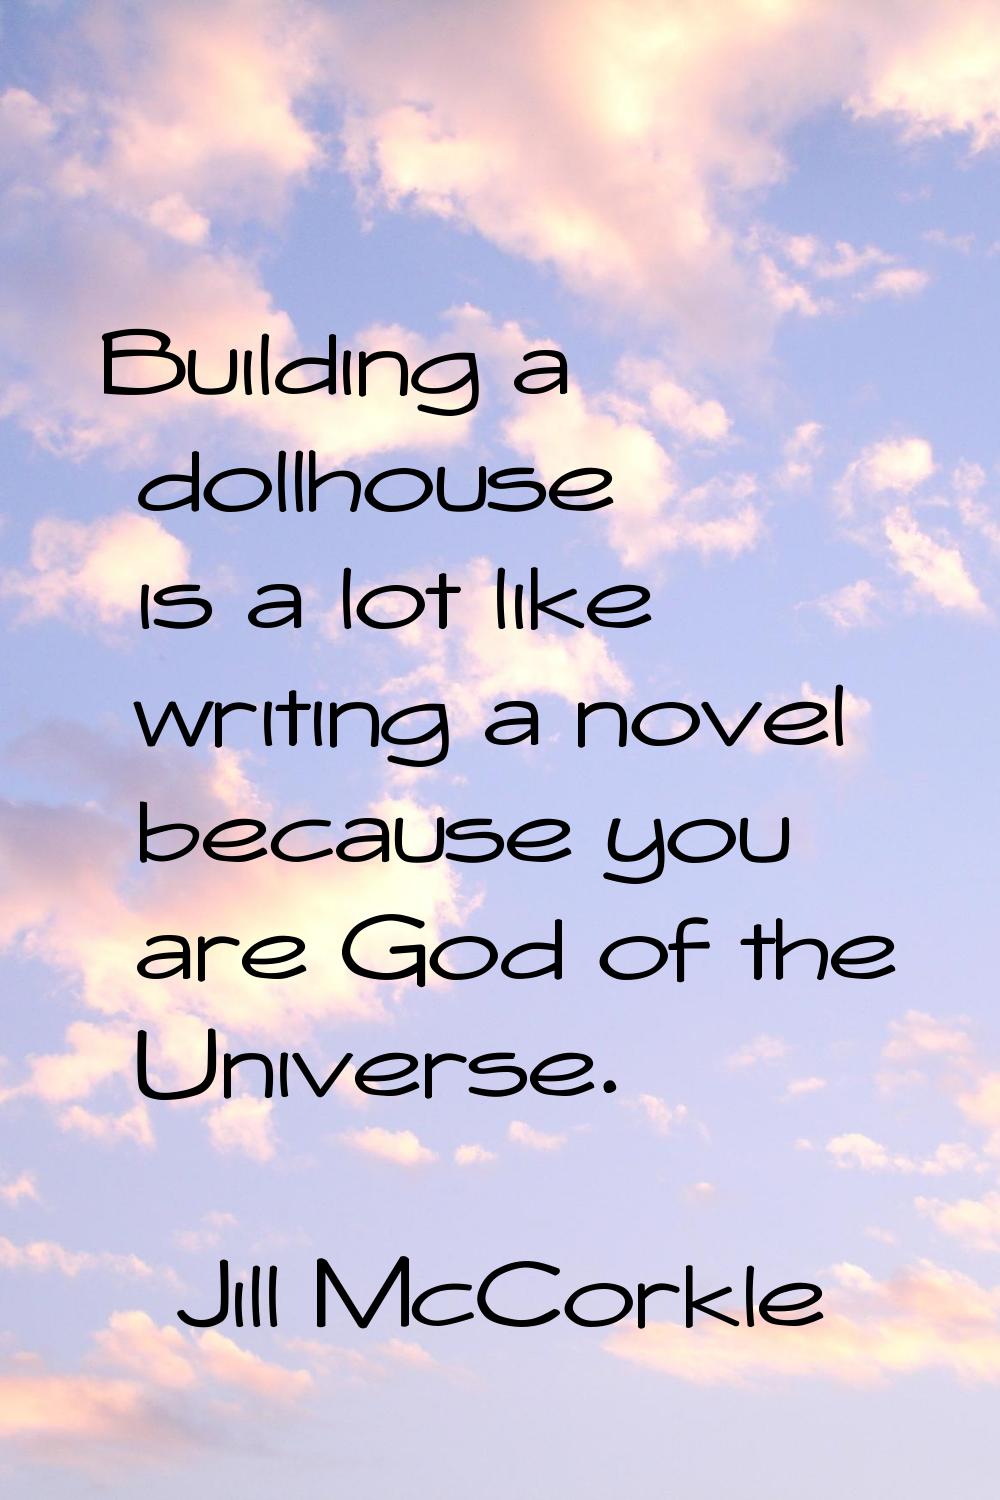 Building a dollhouse is a lot like writing a novel because you are God of the Universe.